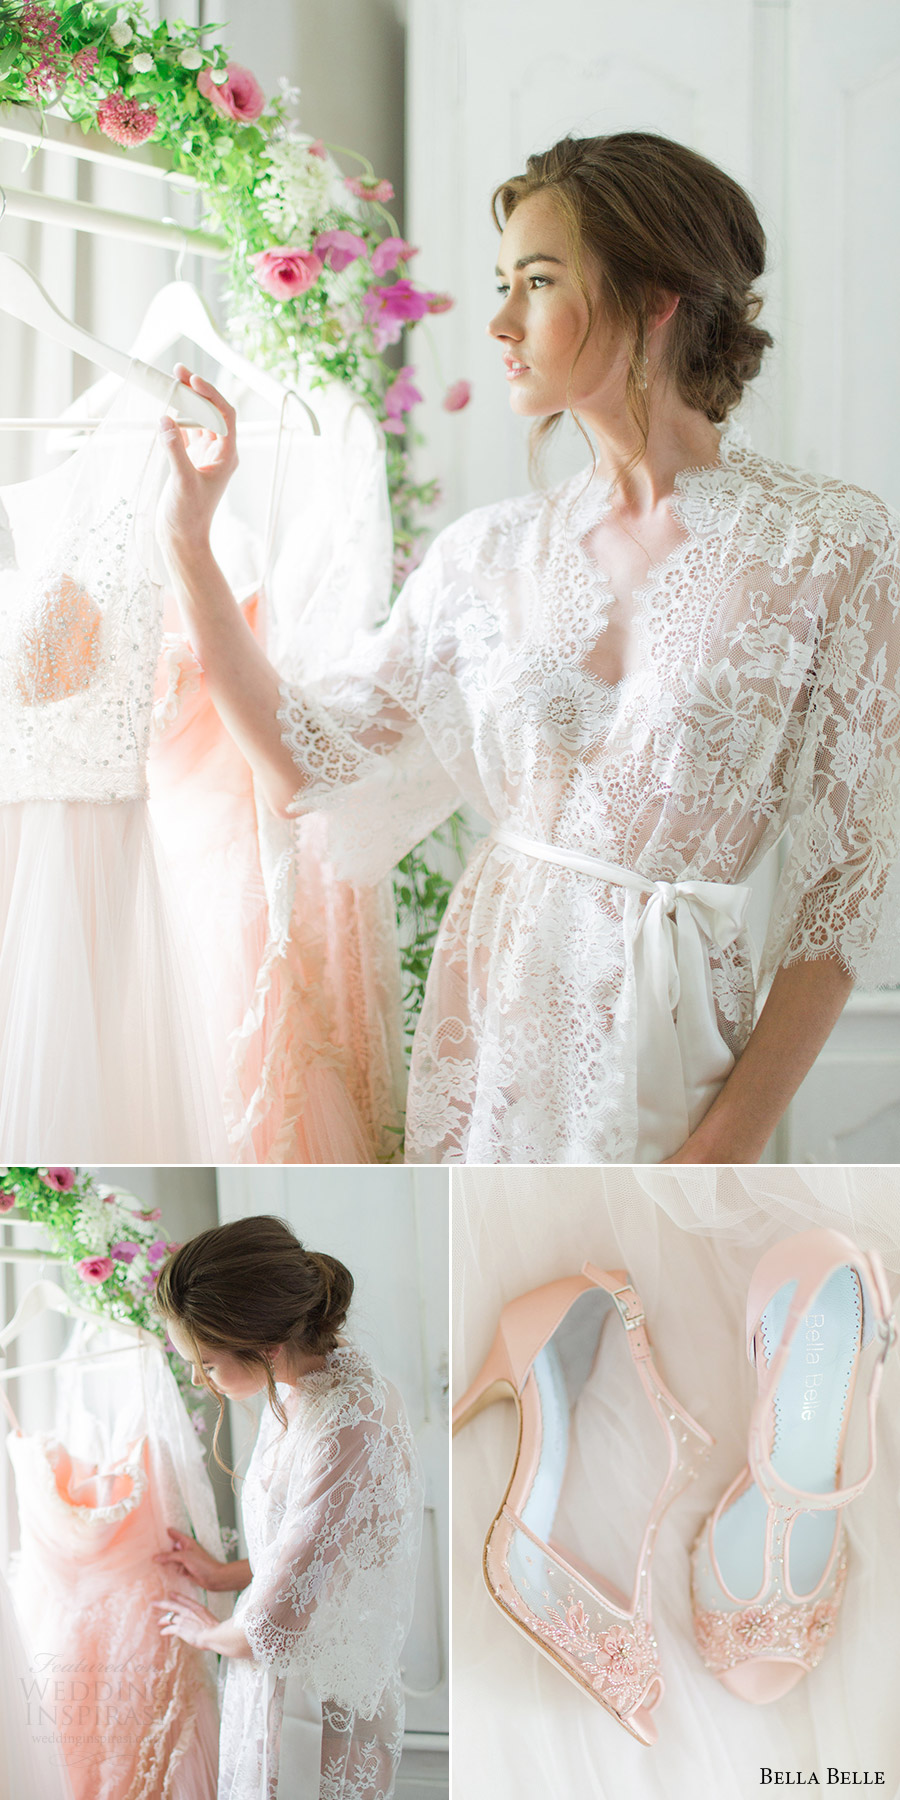 bella belle shoes 2016 rachel may photography blush paloma romantic pink wedding shoes lace robe